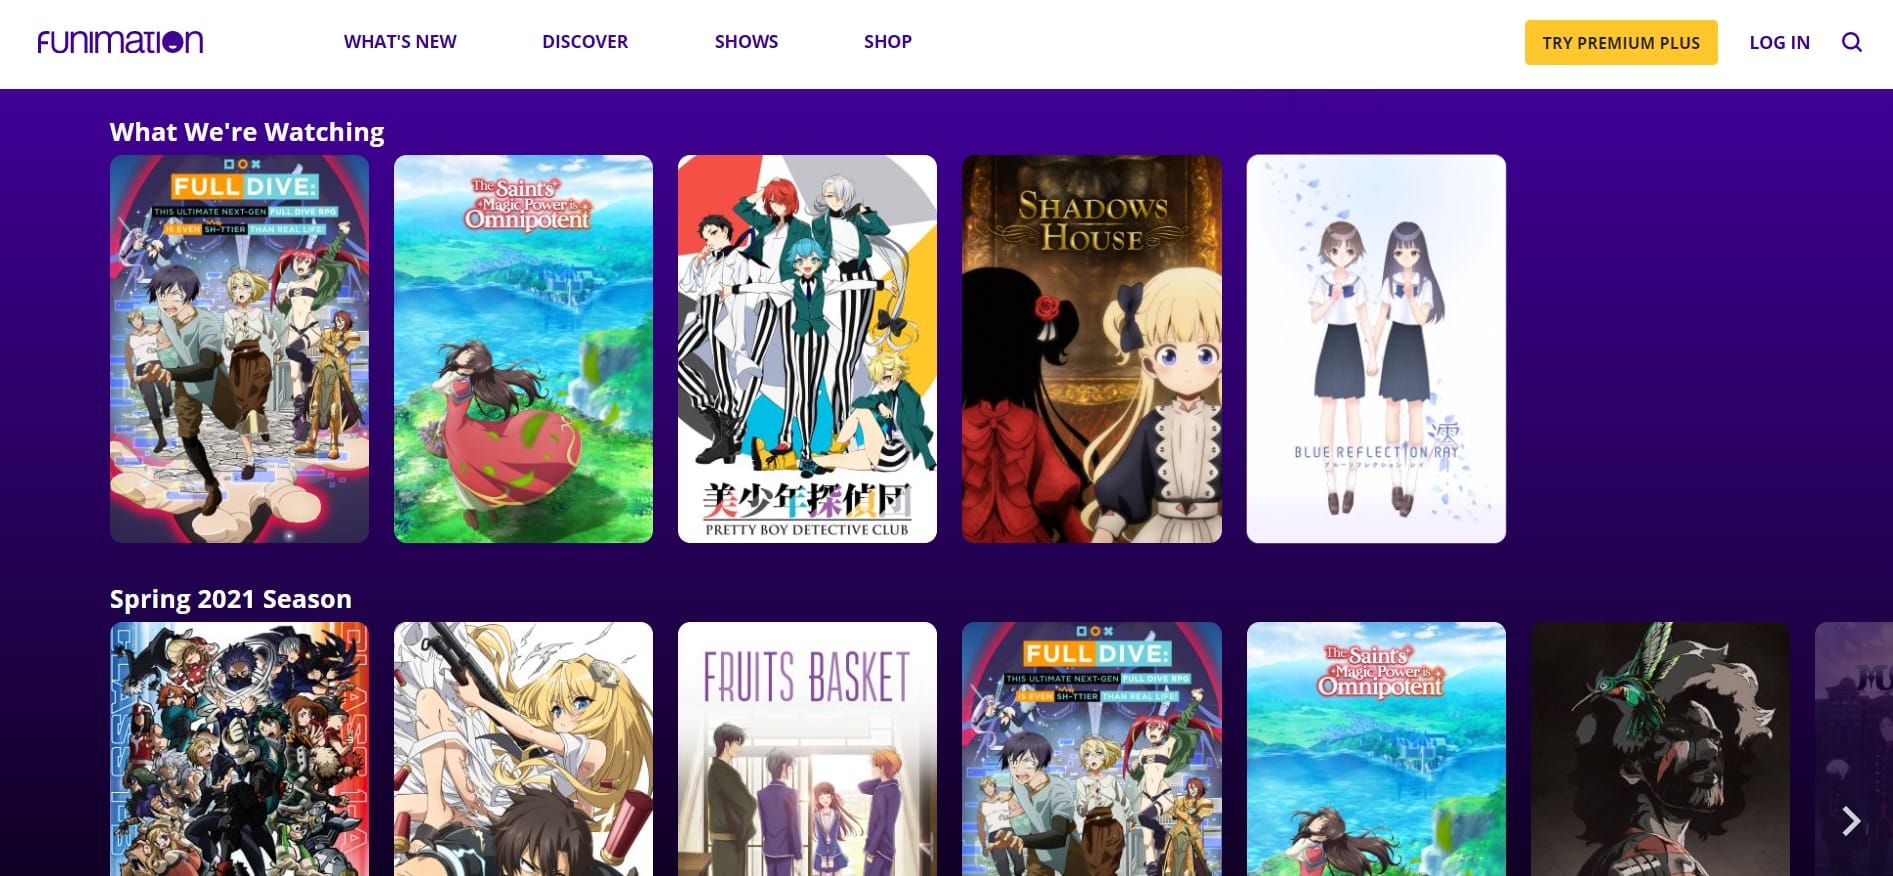 Best Anime Streaming Sites to Watch Anime Free - Funimation